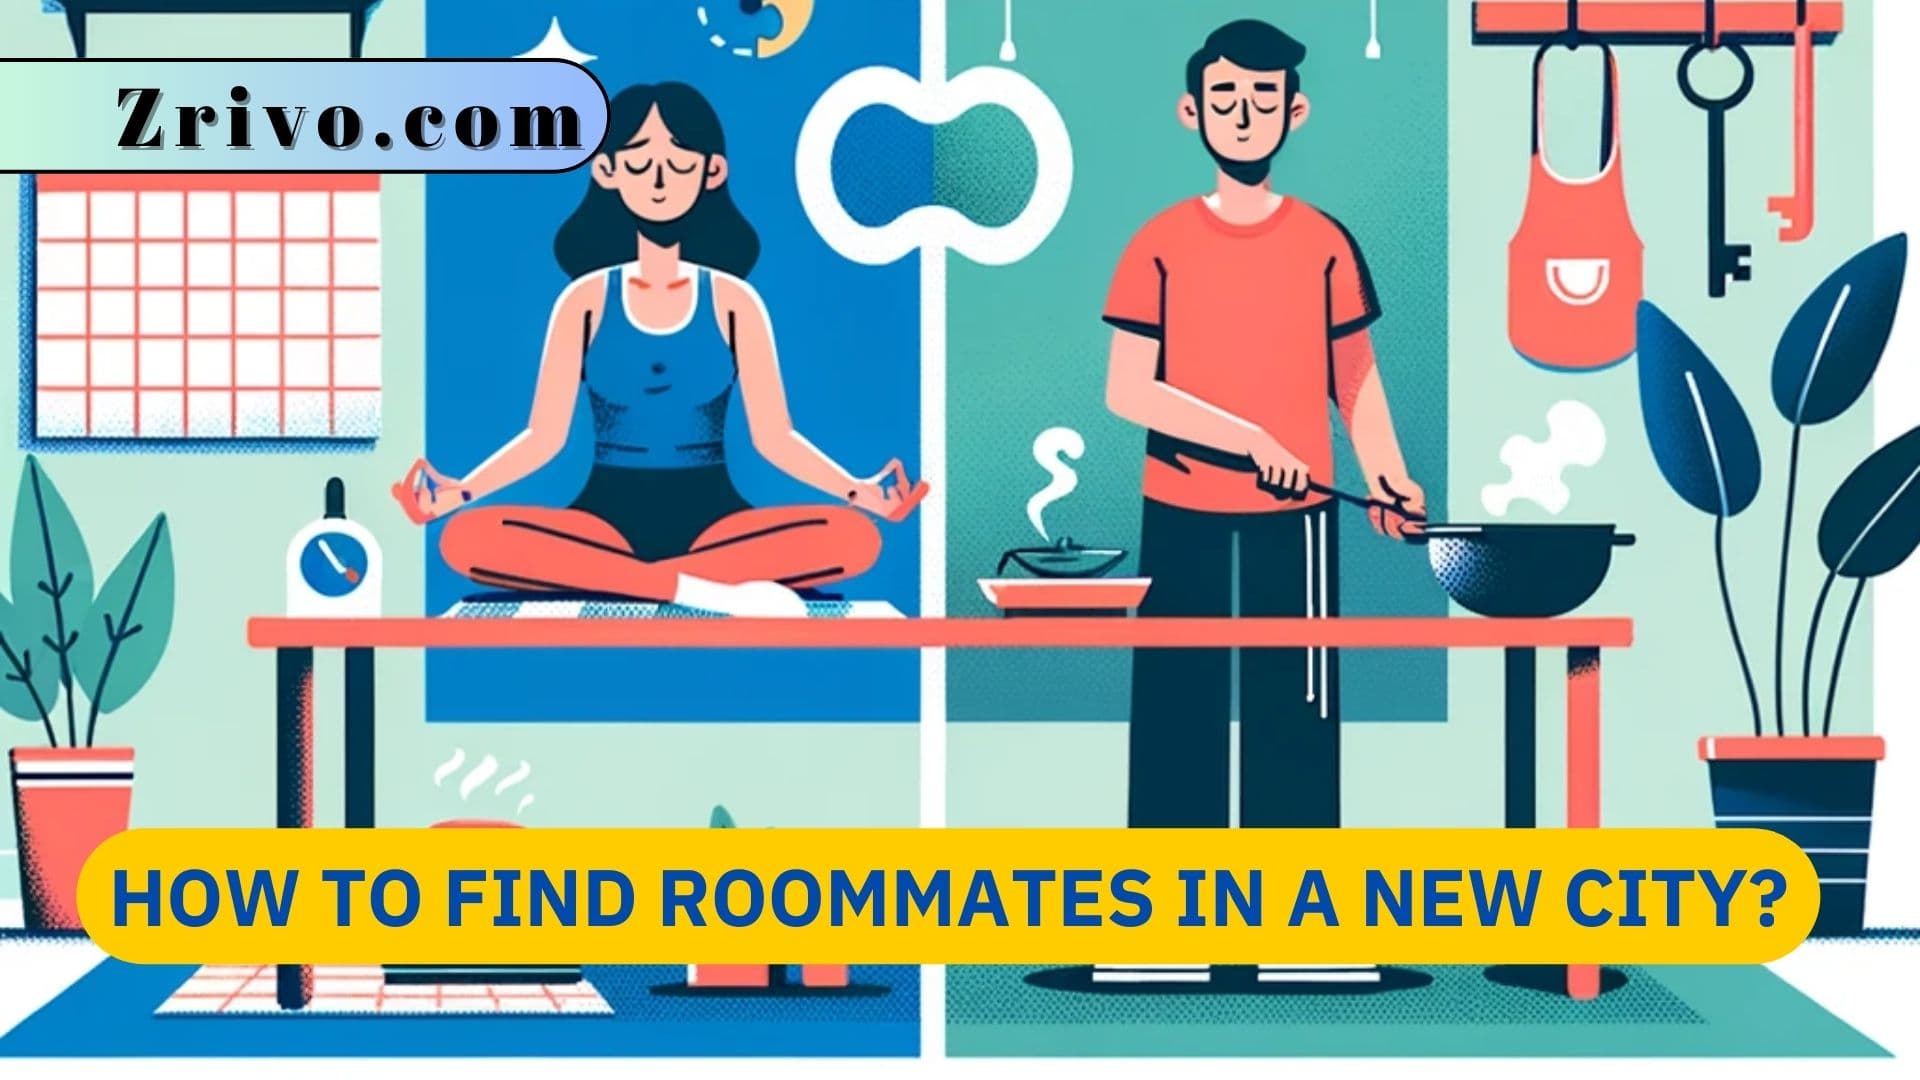 How to Find Roommates in a New City